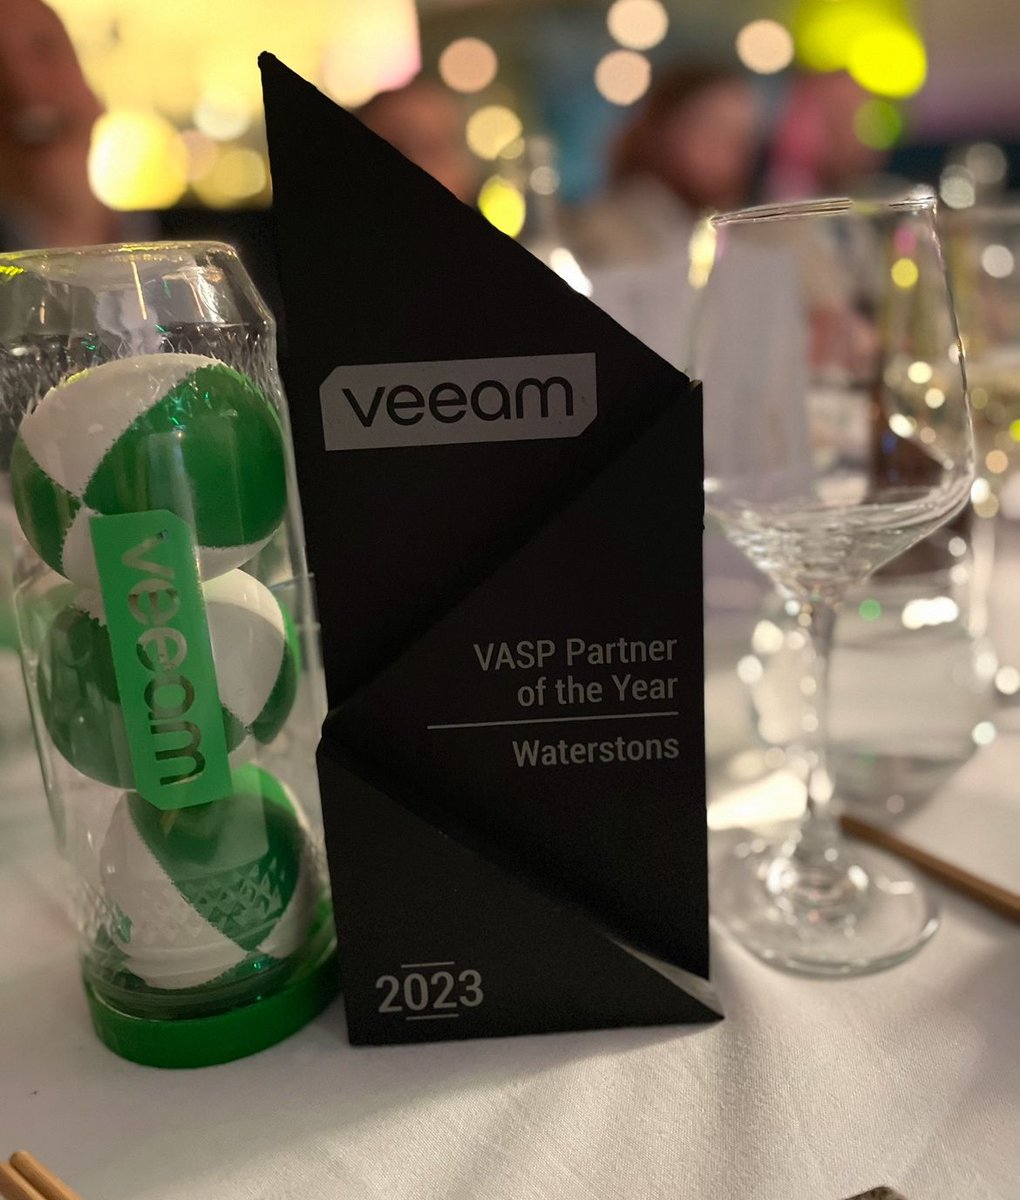 At a very special event last week we were honoured to be named @Veeam Accredited Service Provider of the Year! #Veeam #Software #BackupInfrastructure